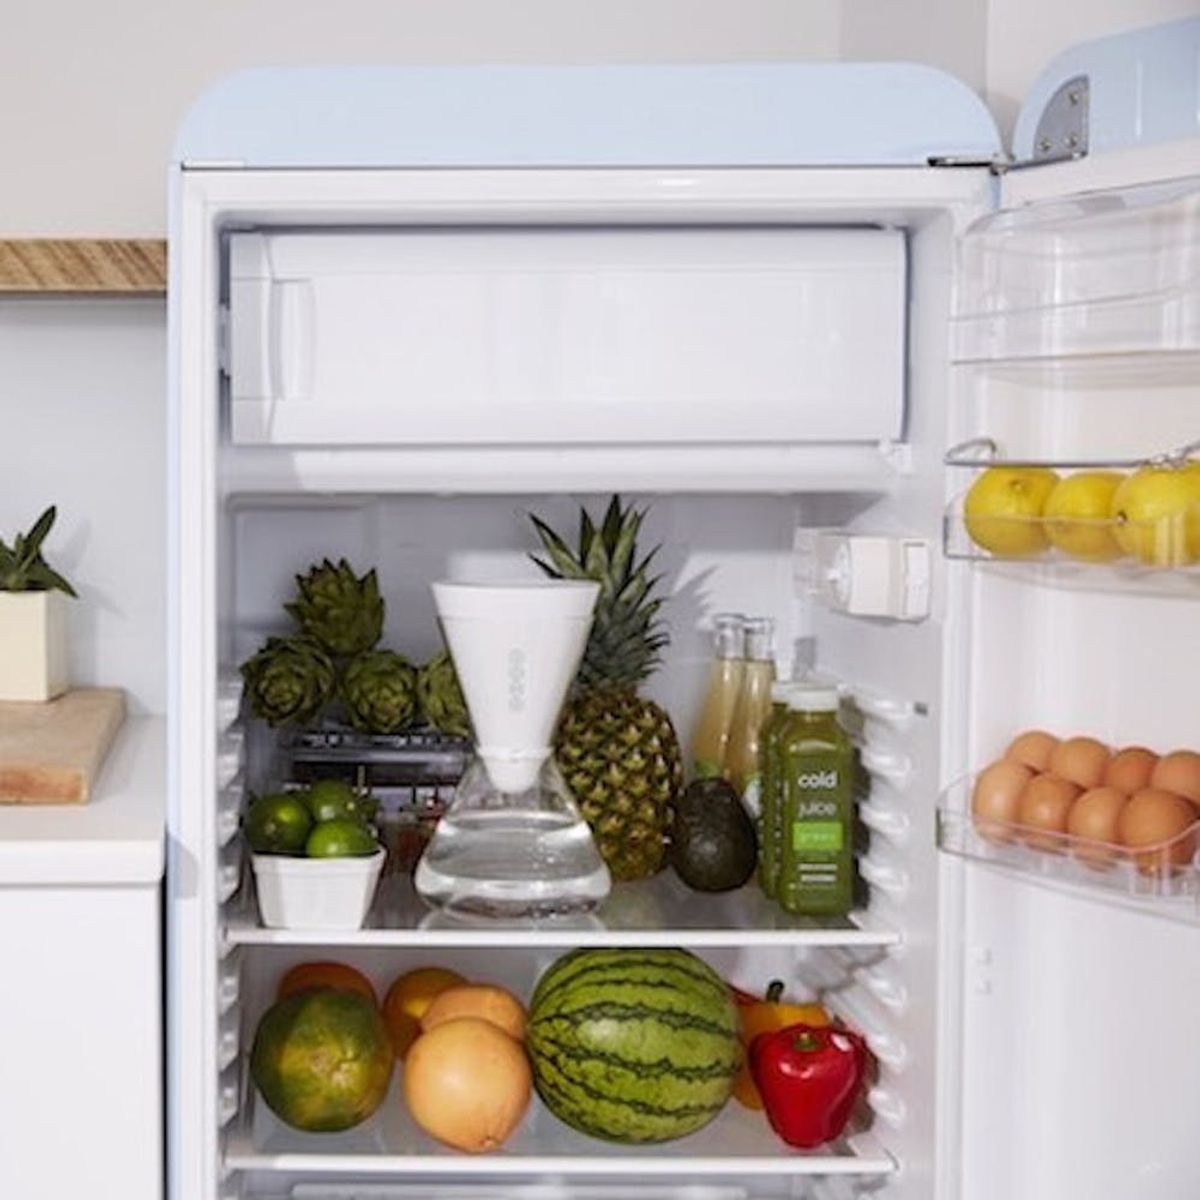 These Ultimate Fridge Hacks Will Save You Time and Money